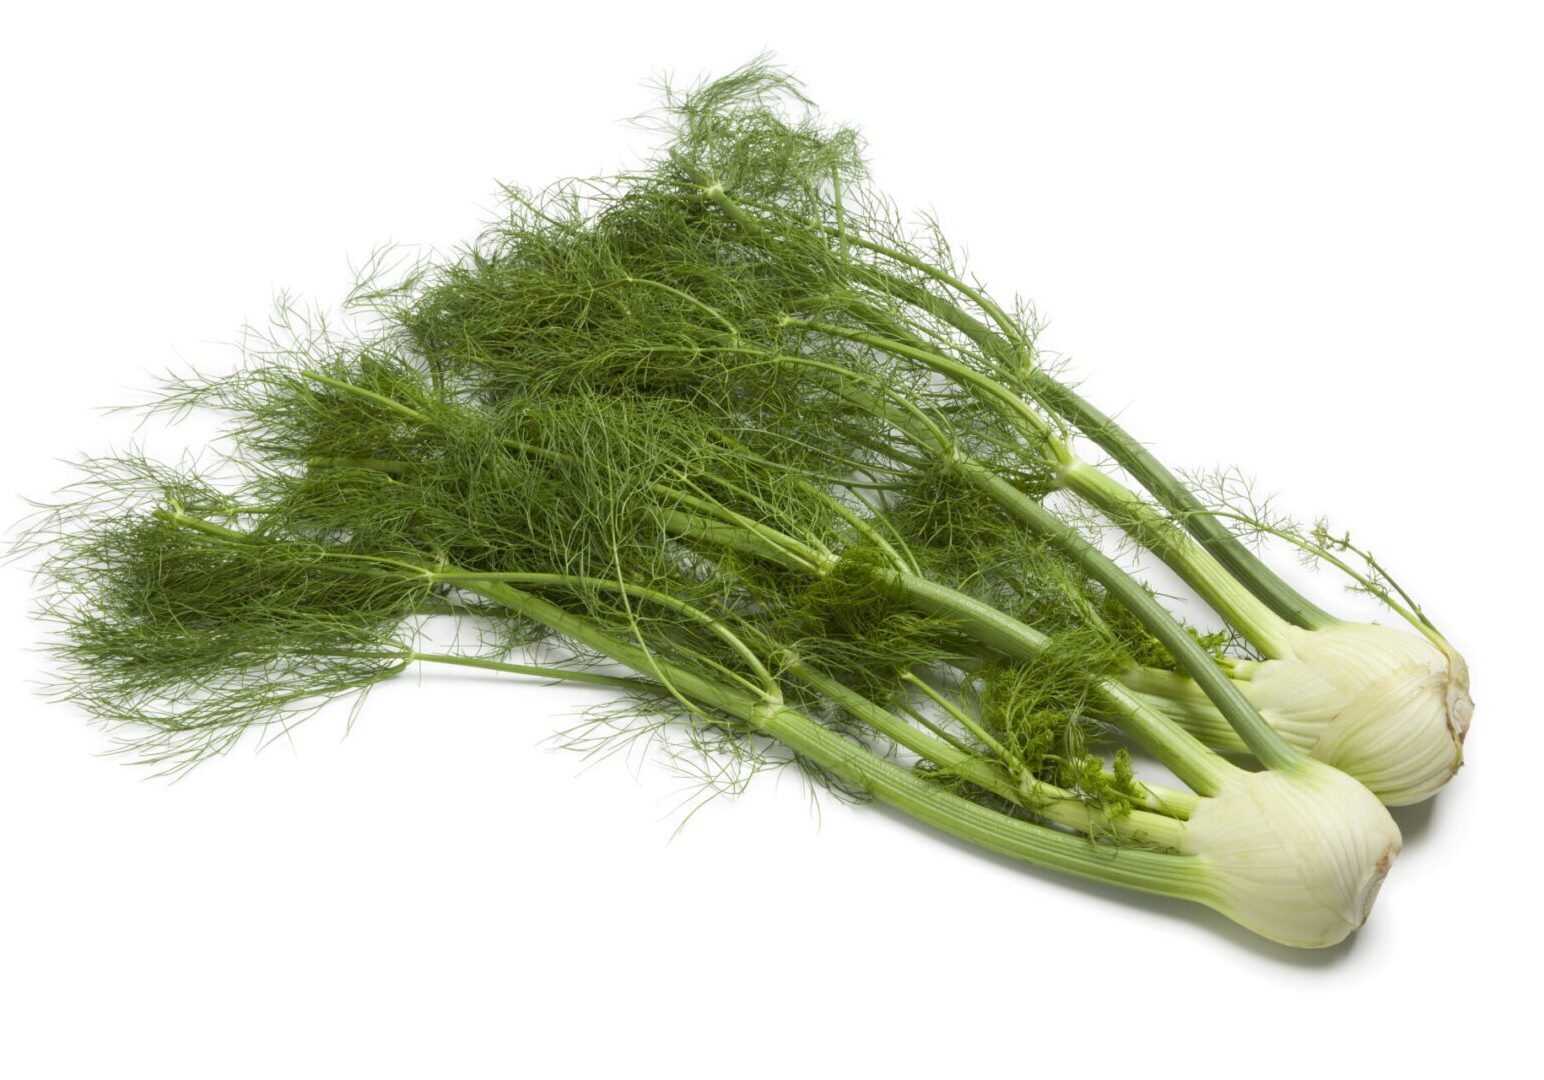 Whole fennel bulbs with green foliage on white background